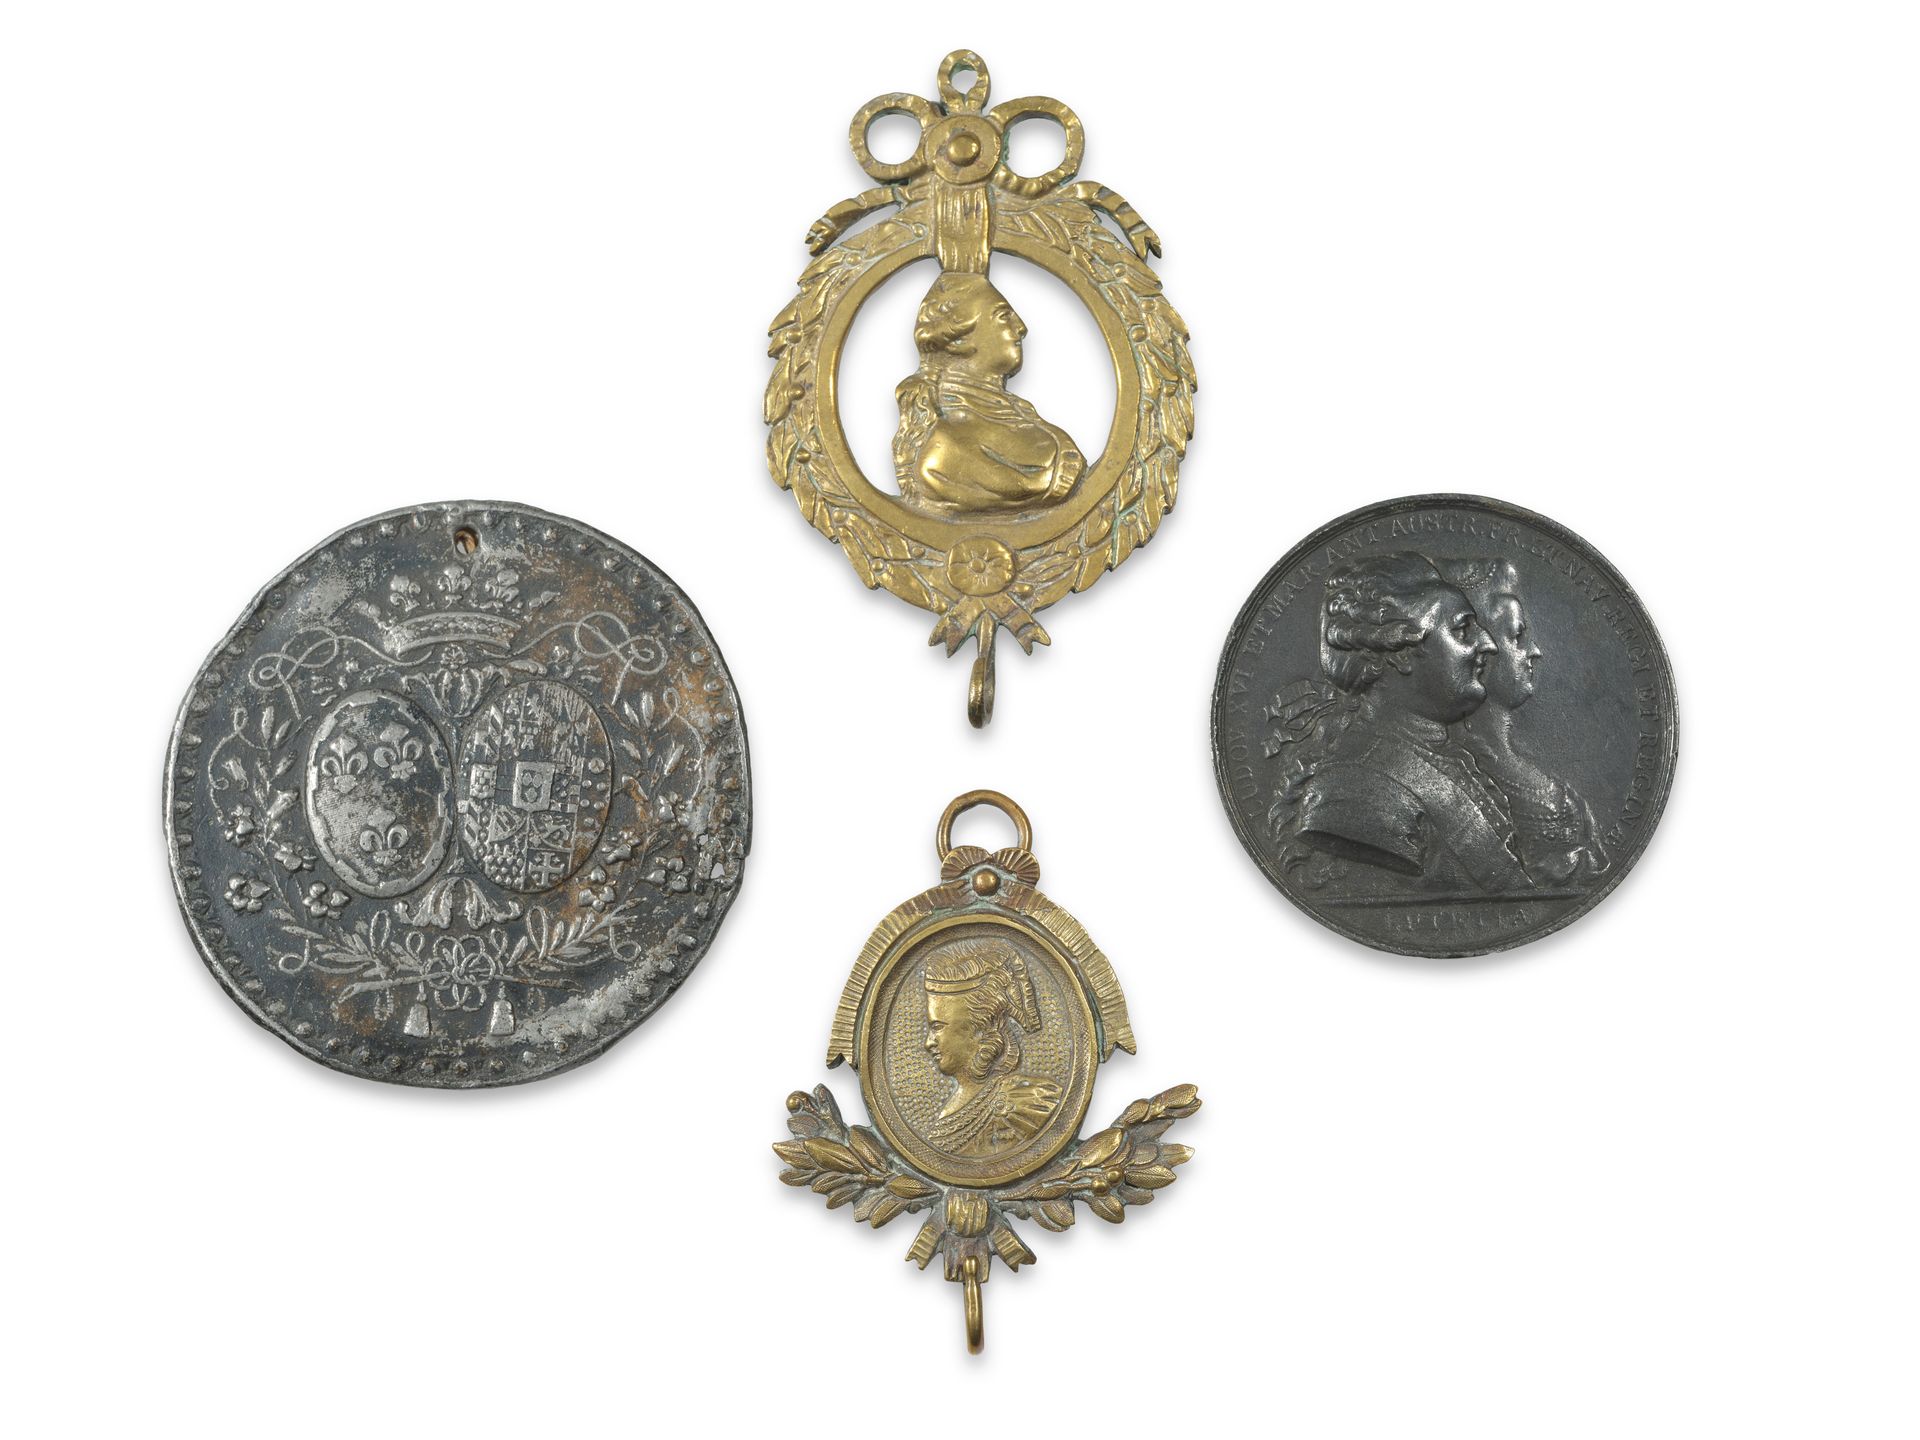 Null Royalist lot including a medallion with the arms of the Duchess of Berry, a&hellip;